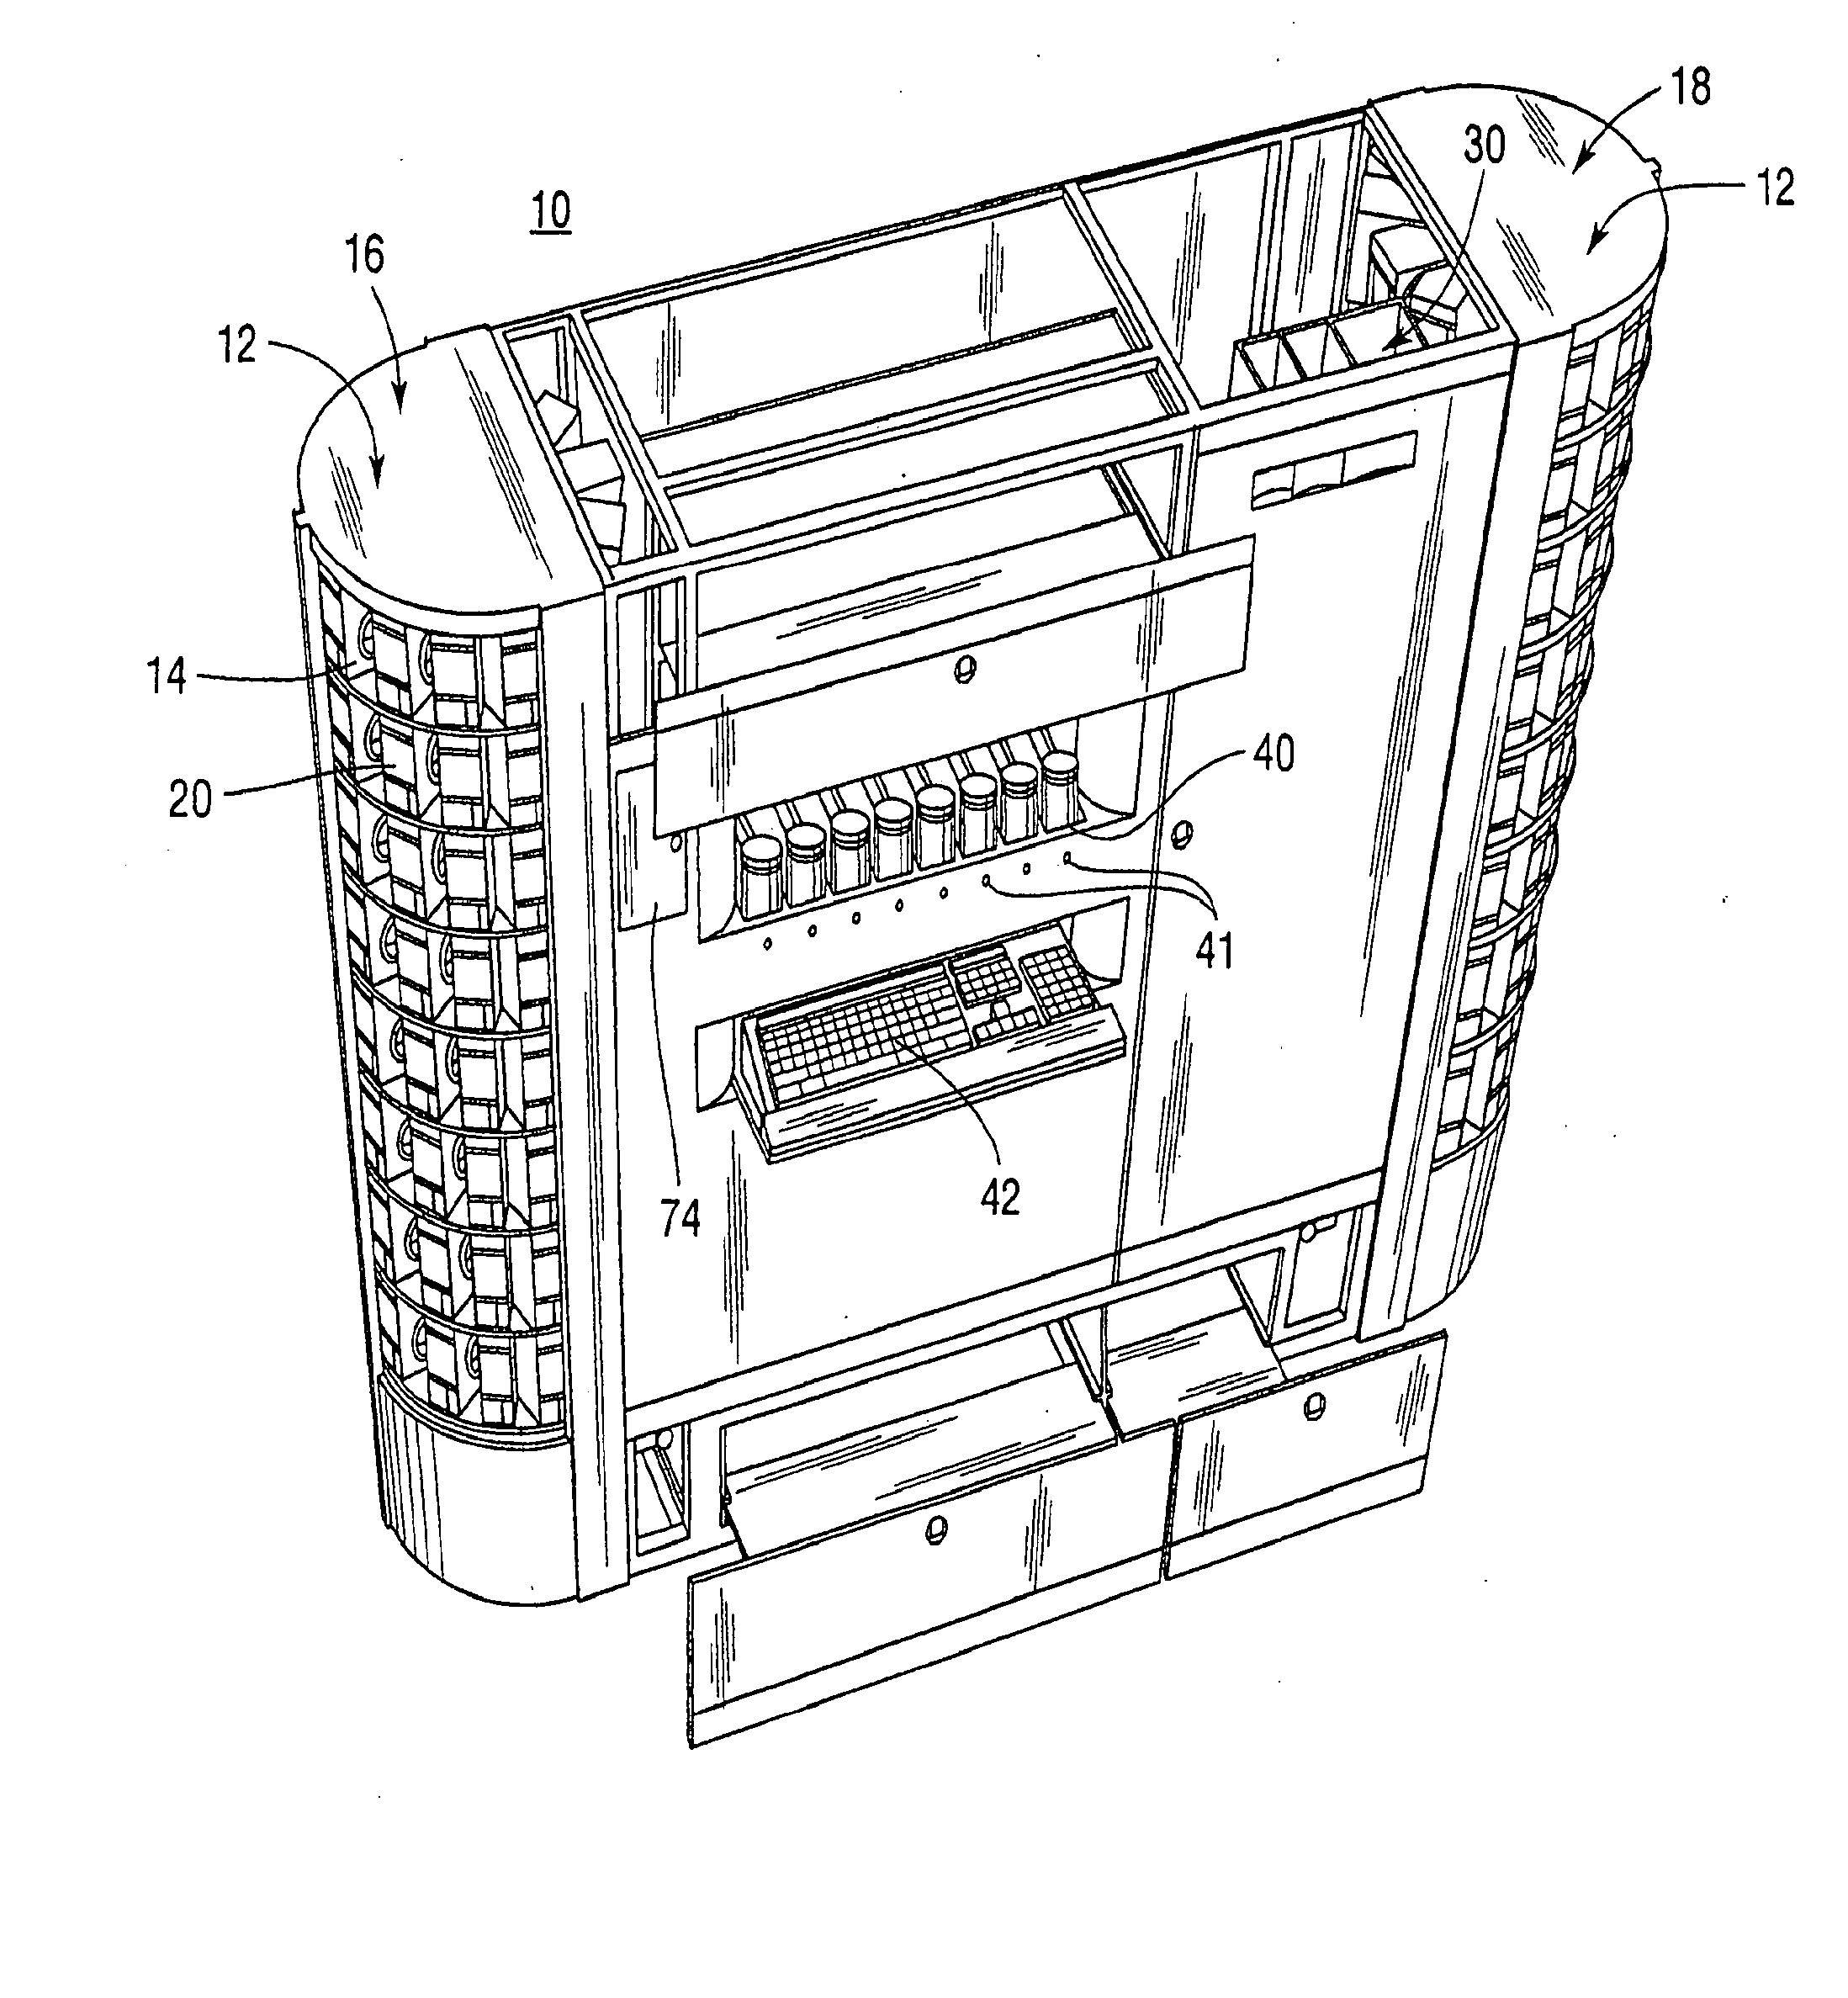 Vacuum pill dispensing cassette and counting machine